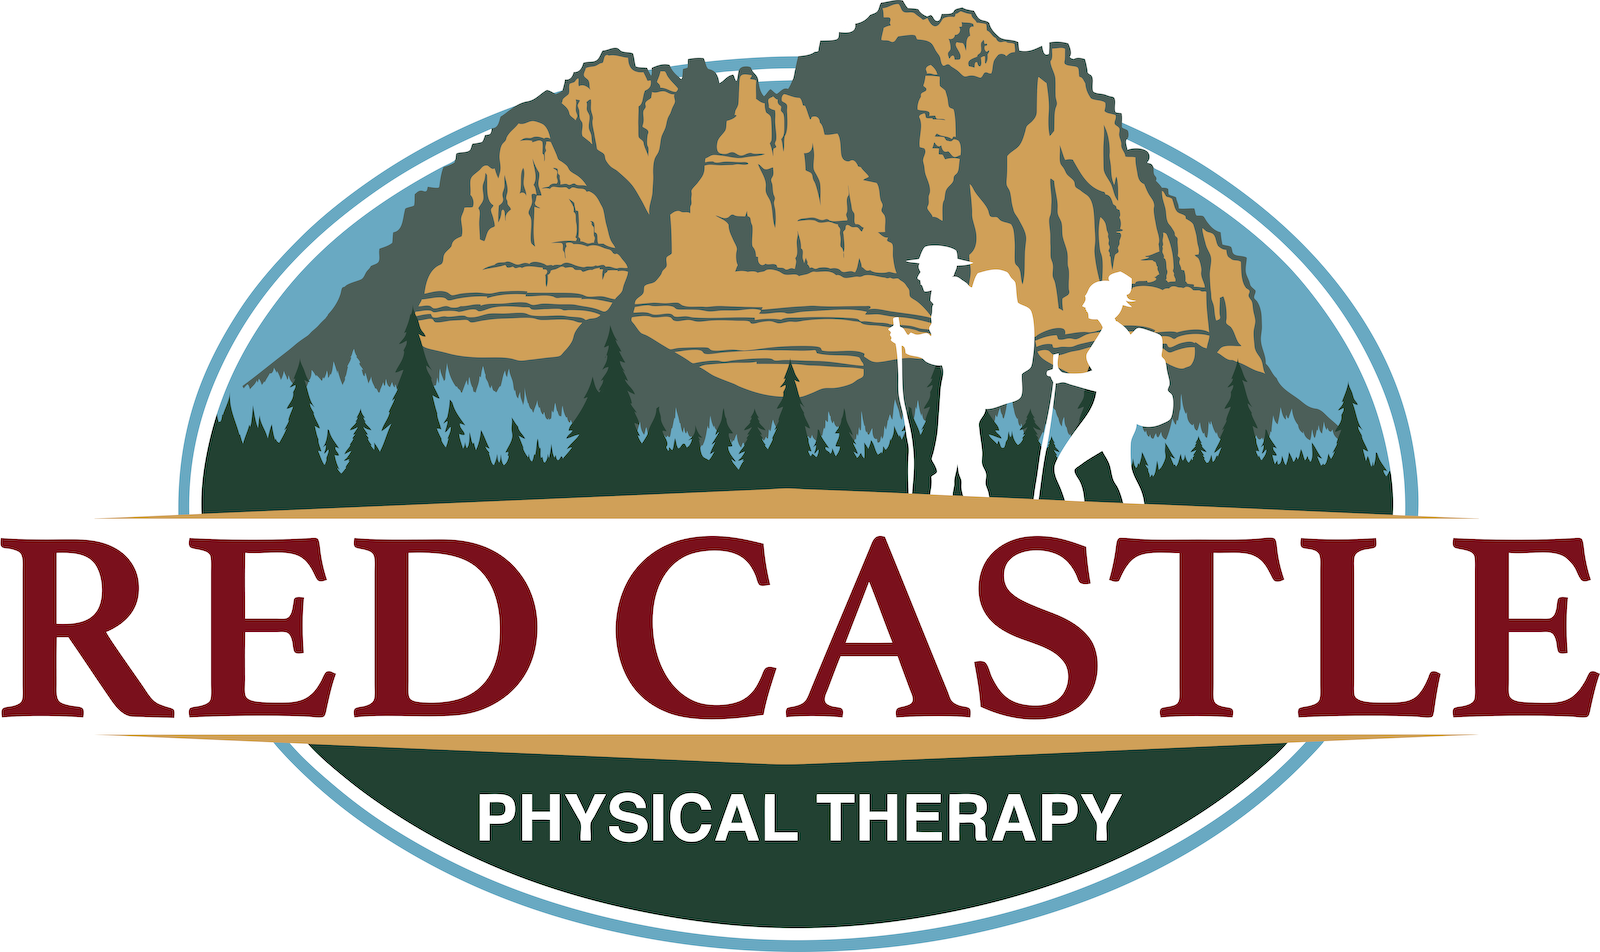 Red Castle Physical Therapy